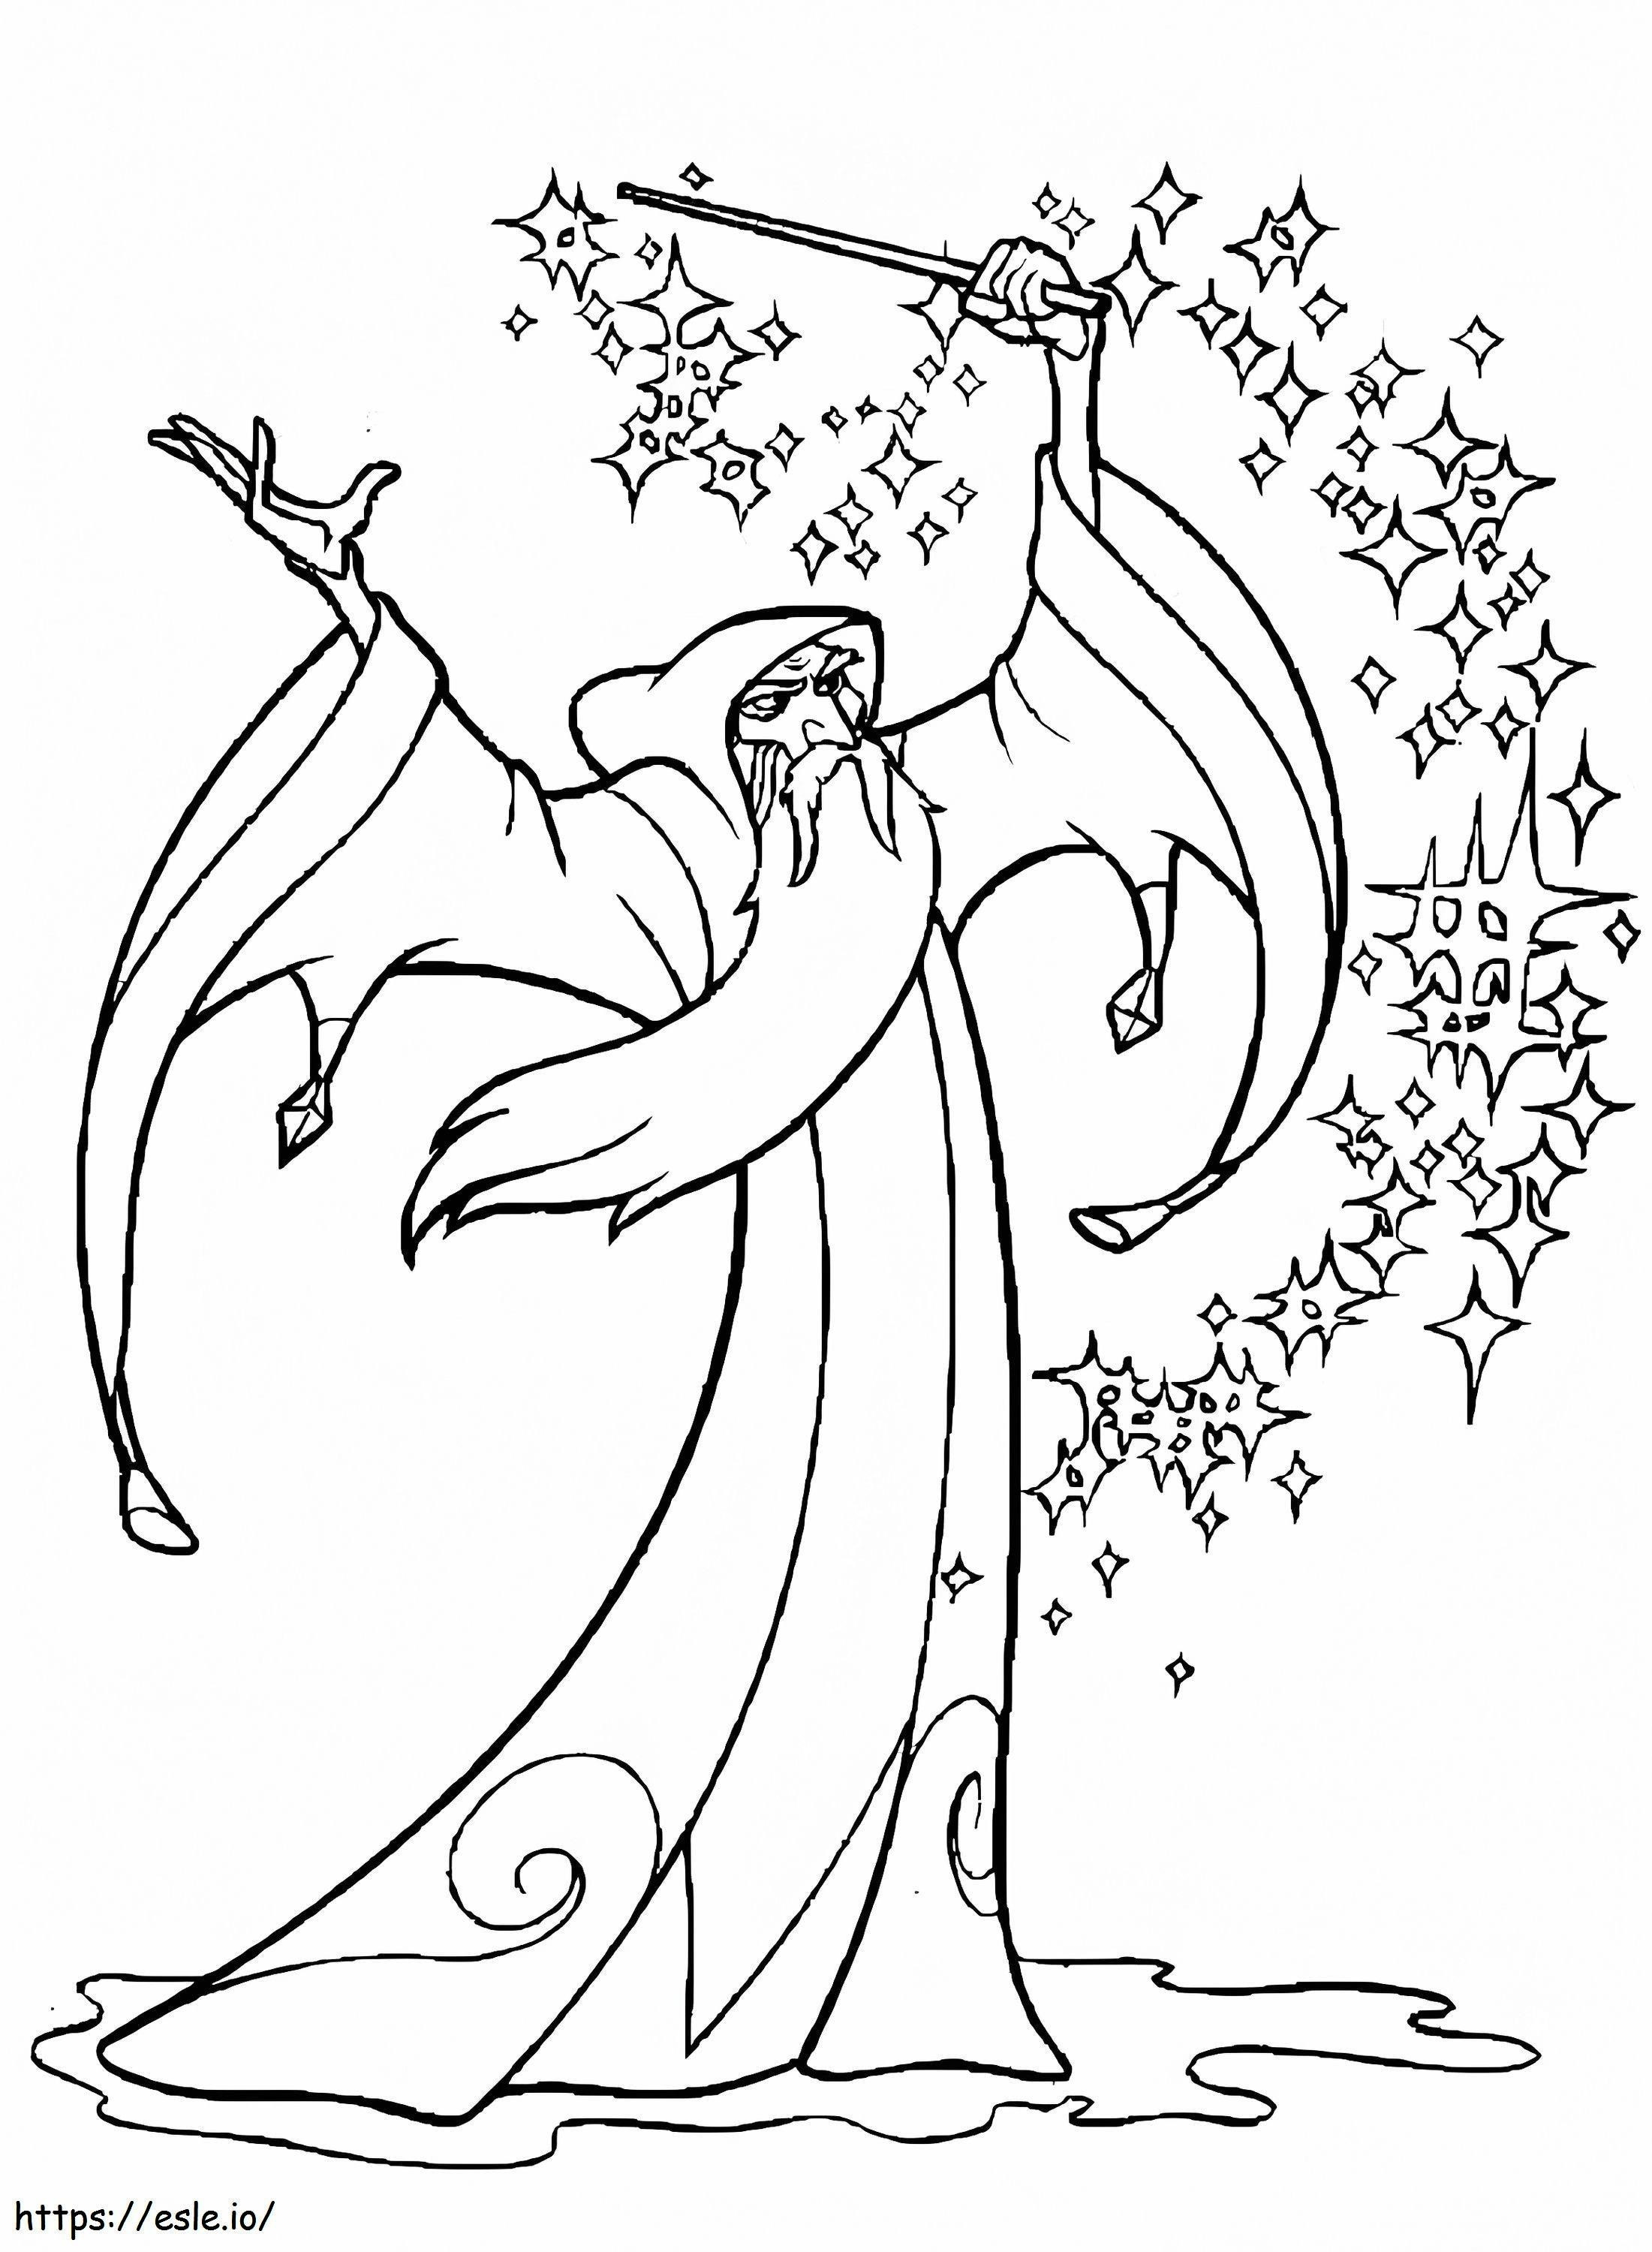 Quest For Camelot 10 coloring page